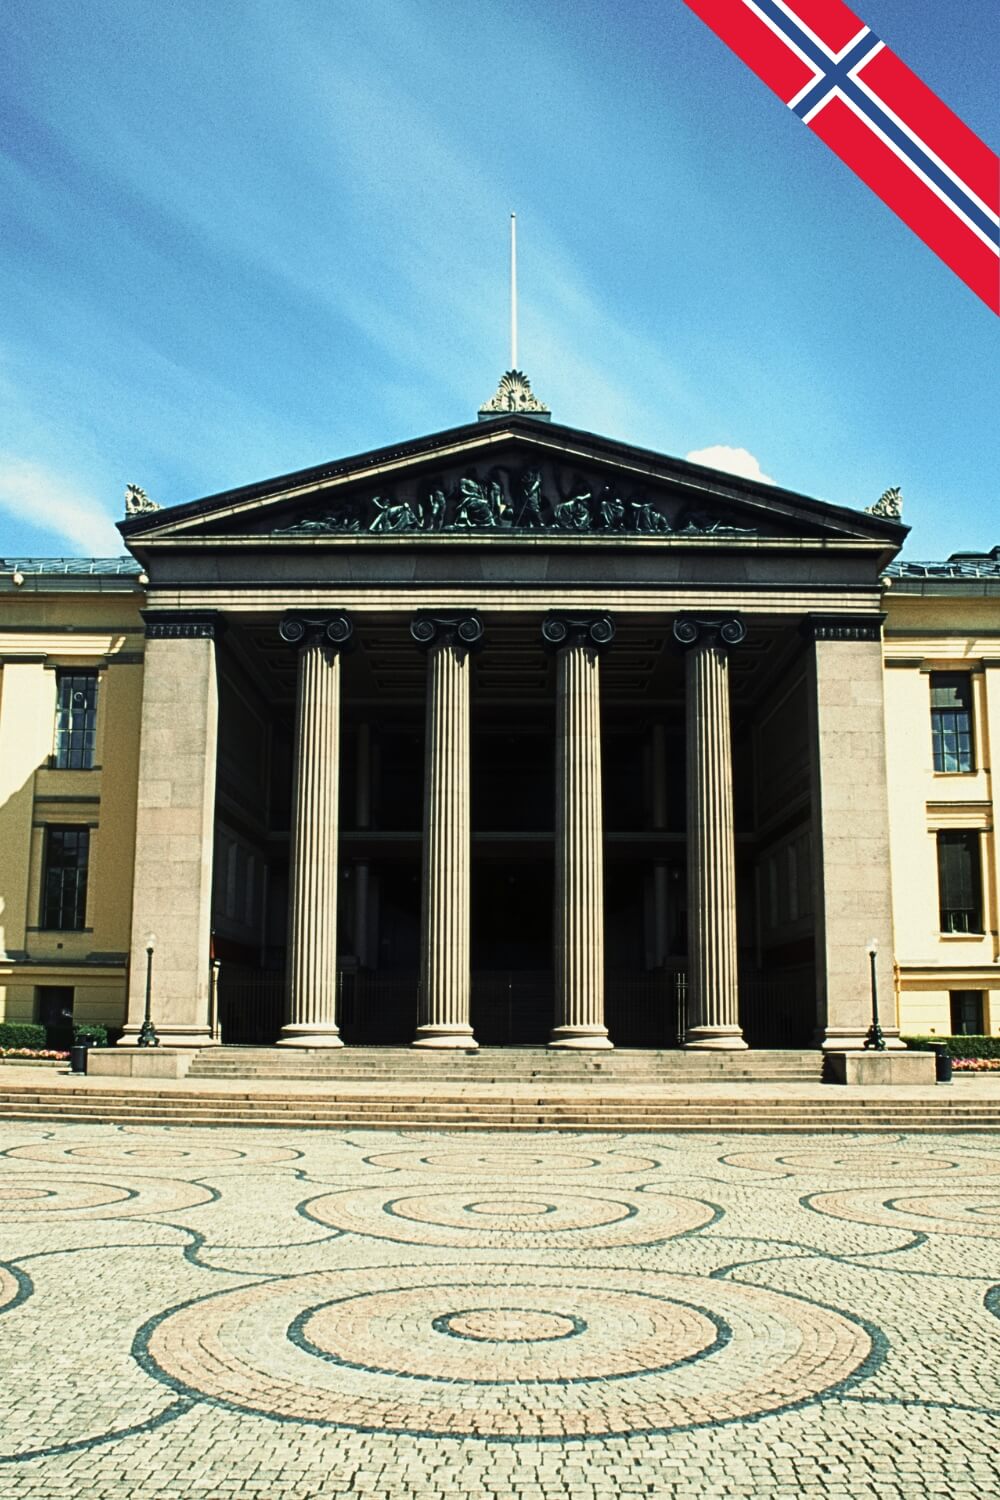 Building of the University of Oslo